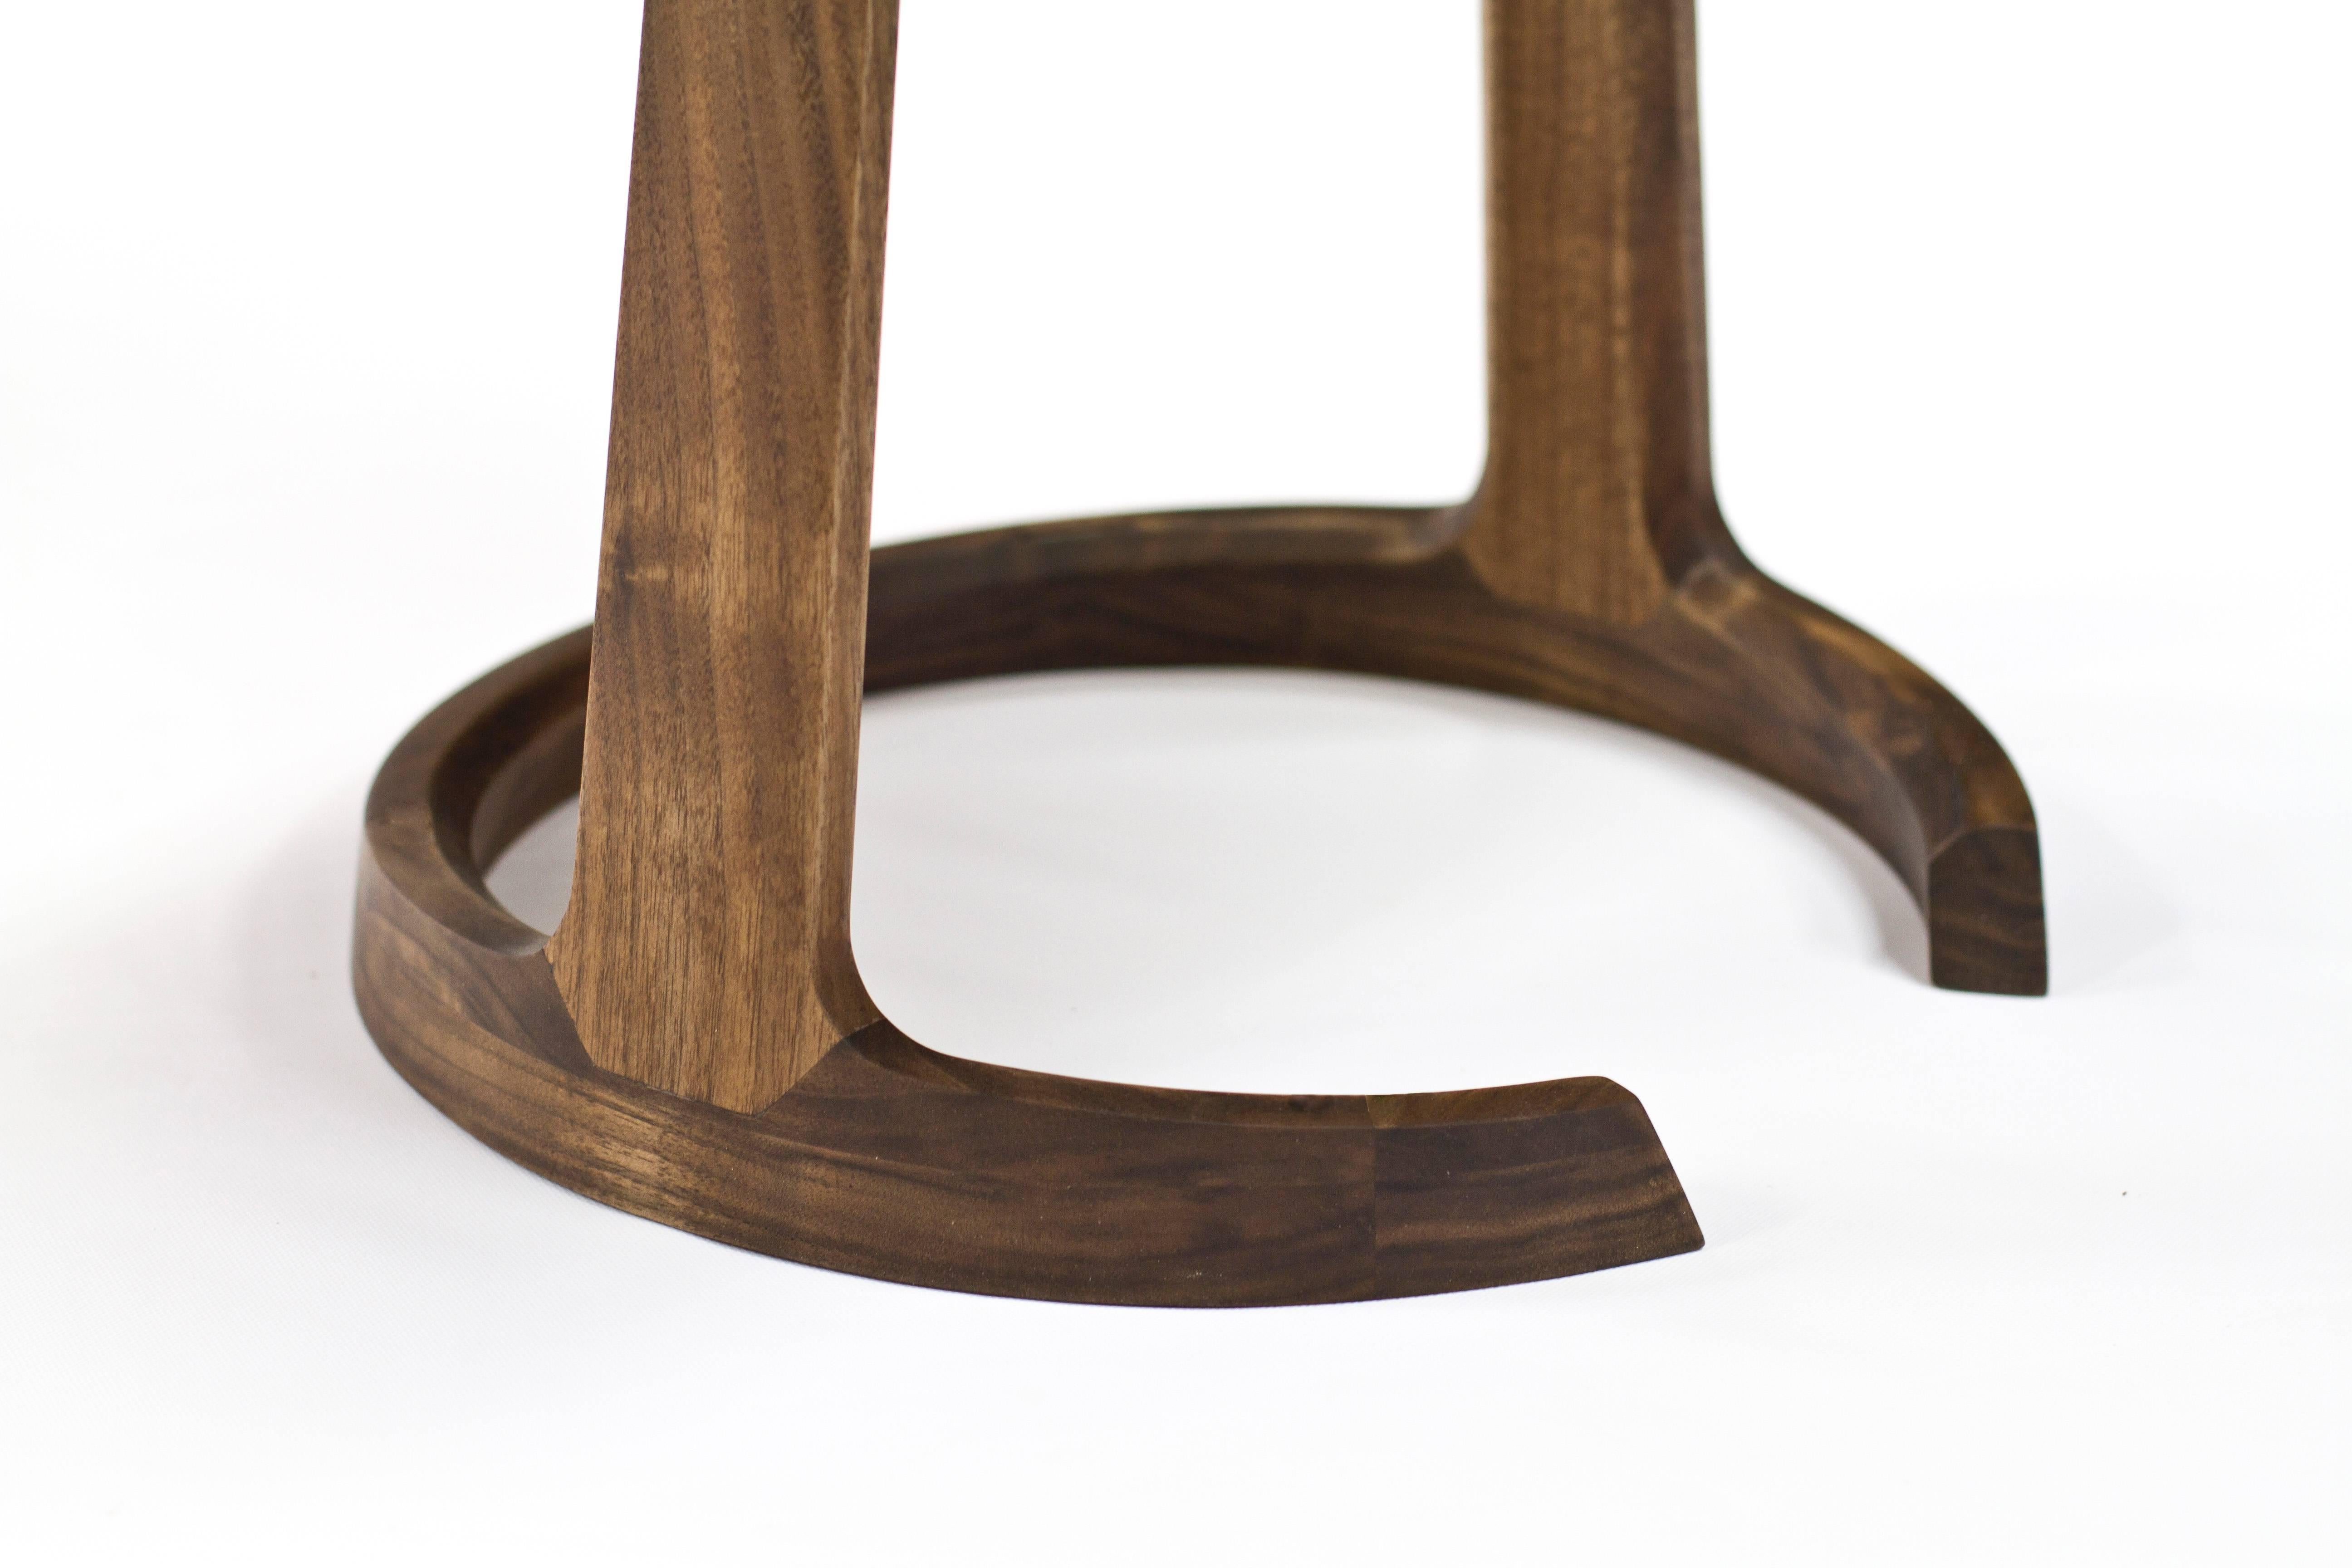 Contemporary Repose End Table in Walnut by Zac Feltoon for Wooda